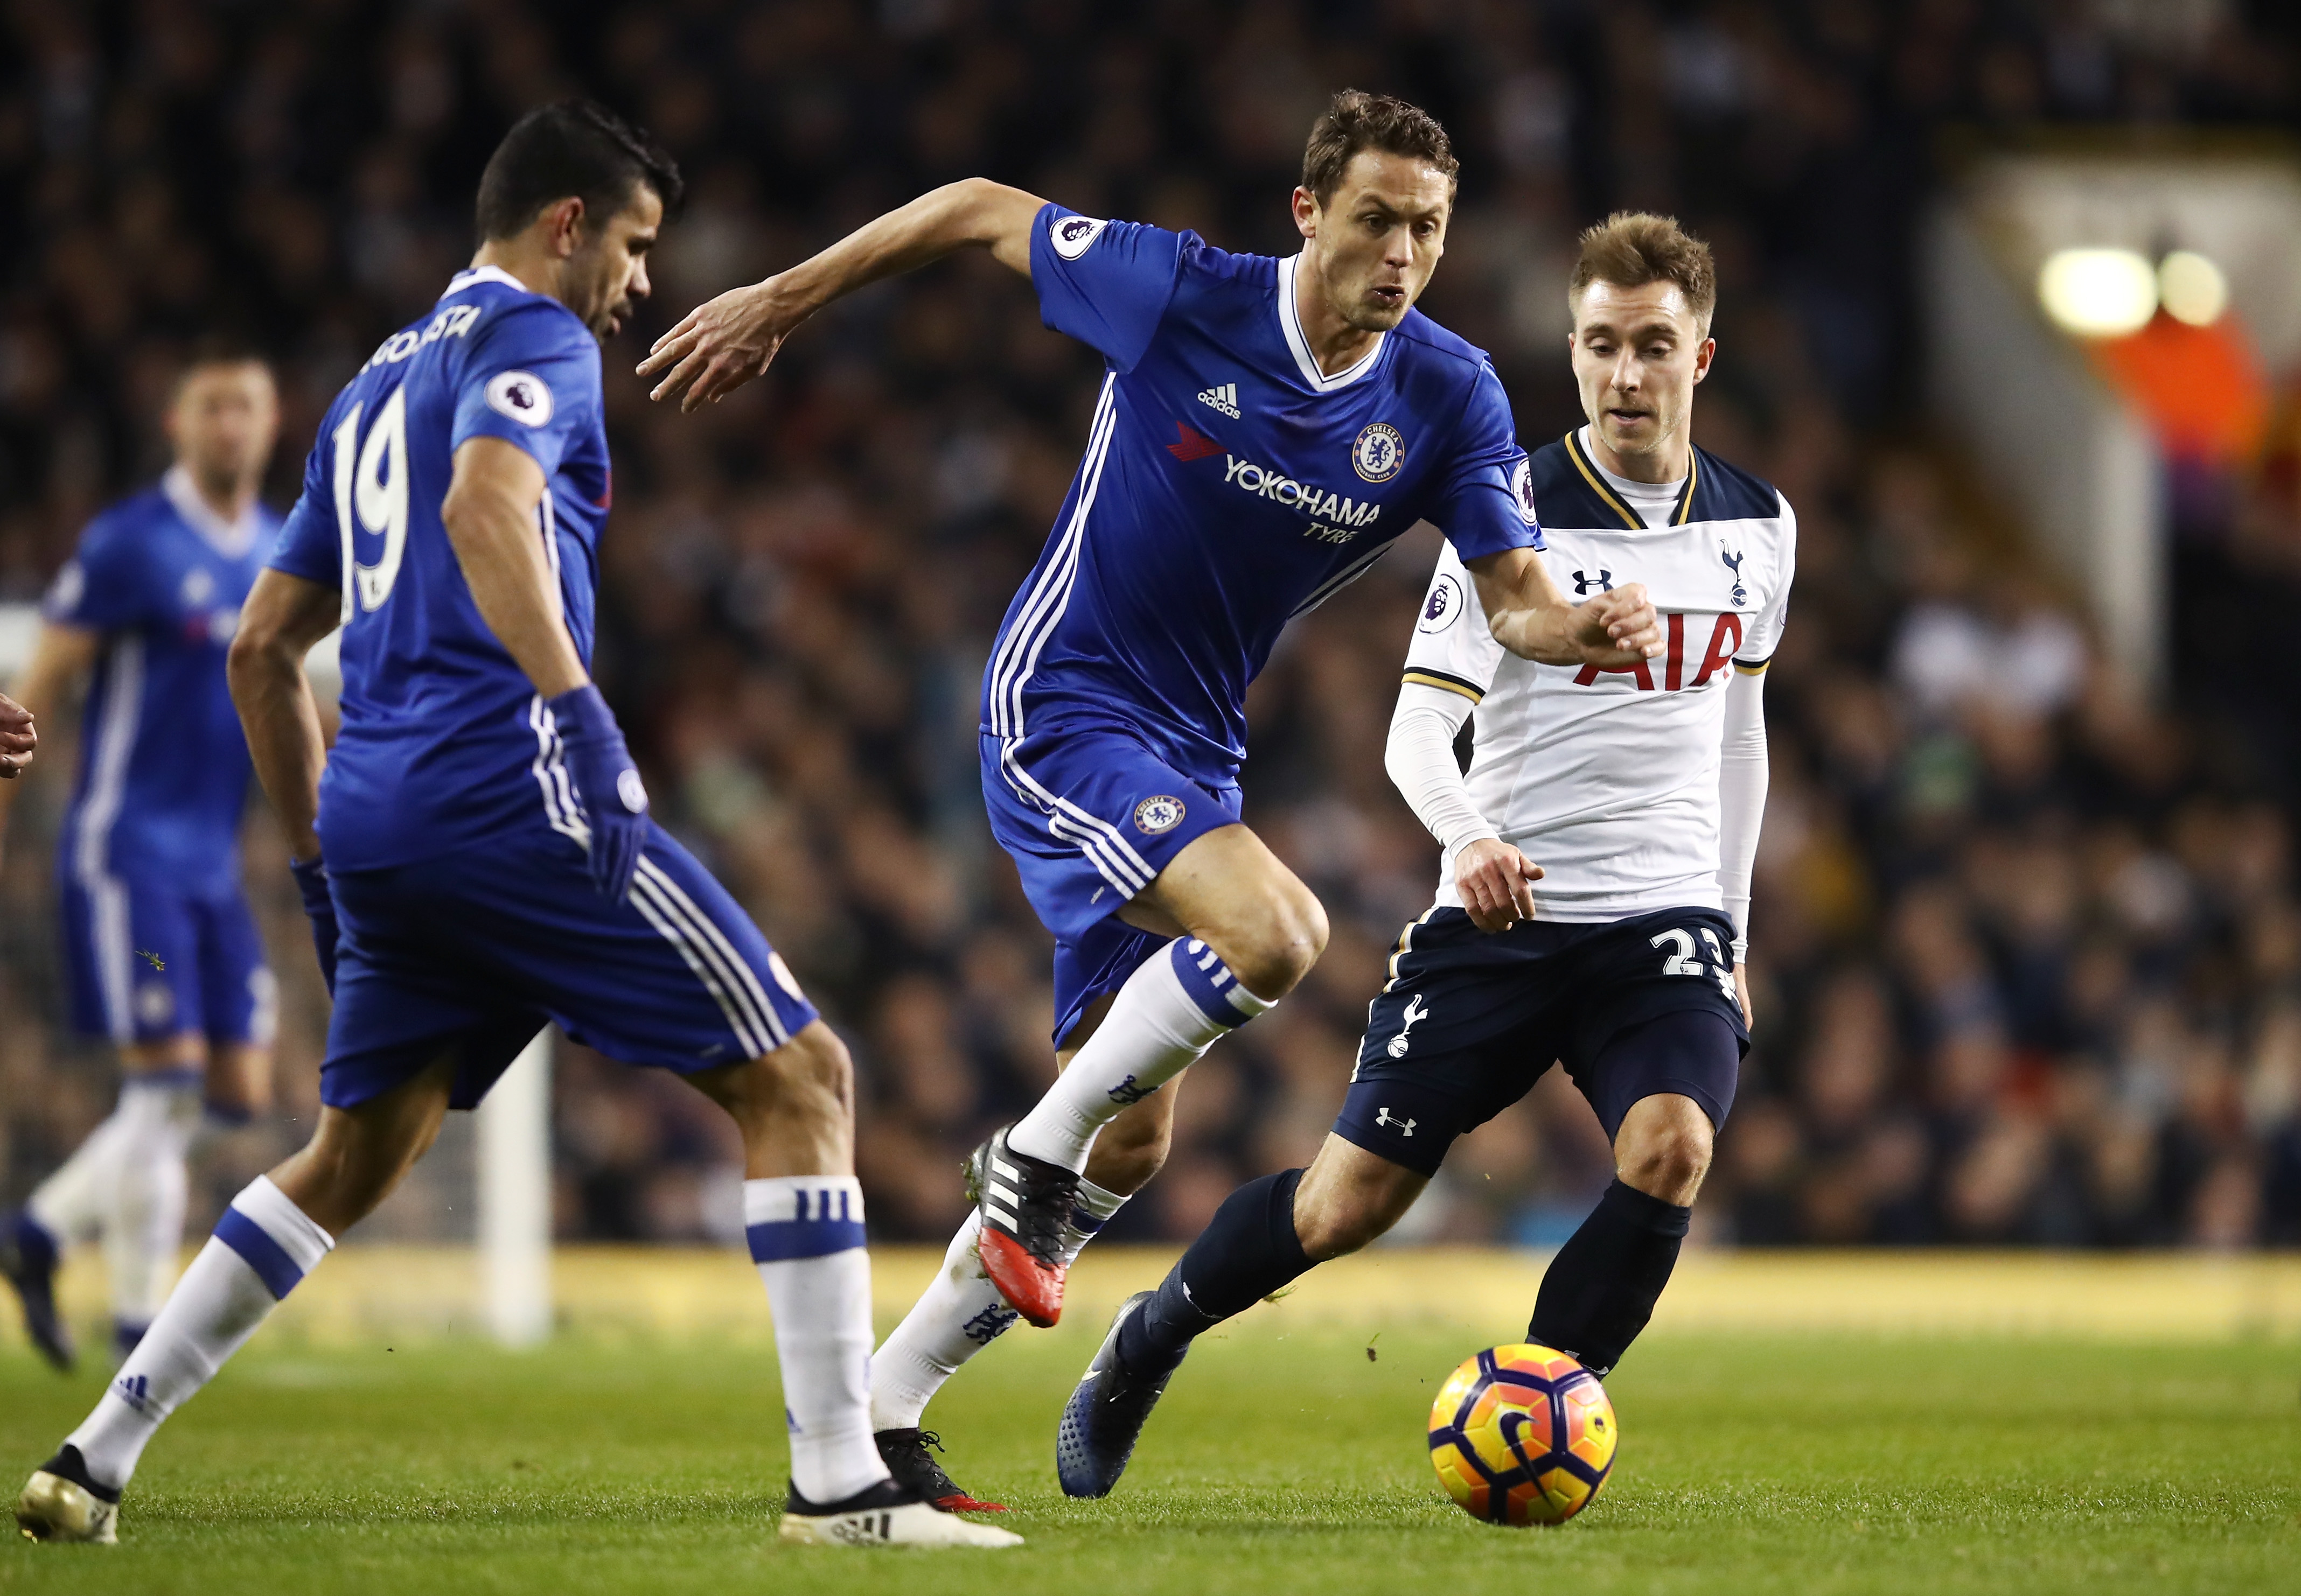 LONDON, ENGLAND - JANUARY 04: Nemanja Matic of Chelsea (C) attempts to take the ball past Christian Eriksen of Tottenham Hotspur (R) during the Premier League match between Tottenham Hotspur and Chelsea at White Hart Lane on January 4, 2017 in London, England.  (Photo by Julian Finney/Getty Images)